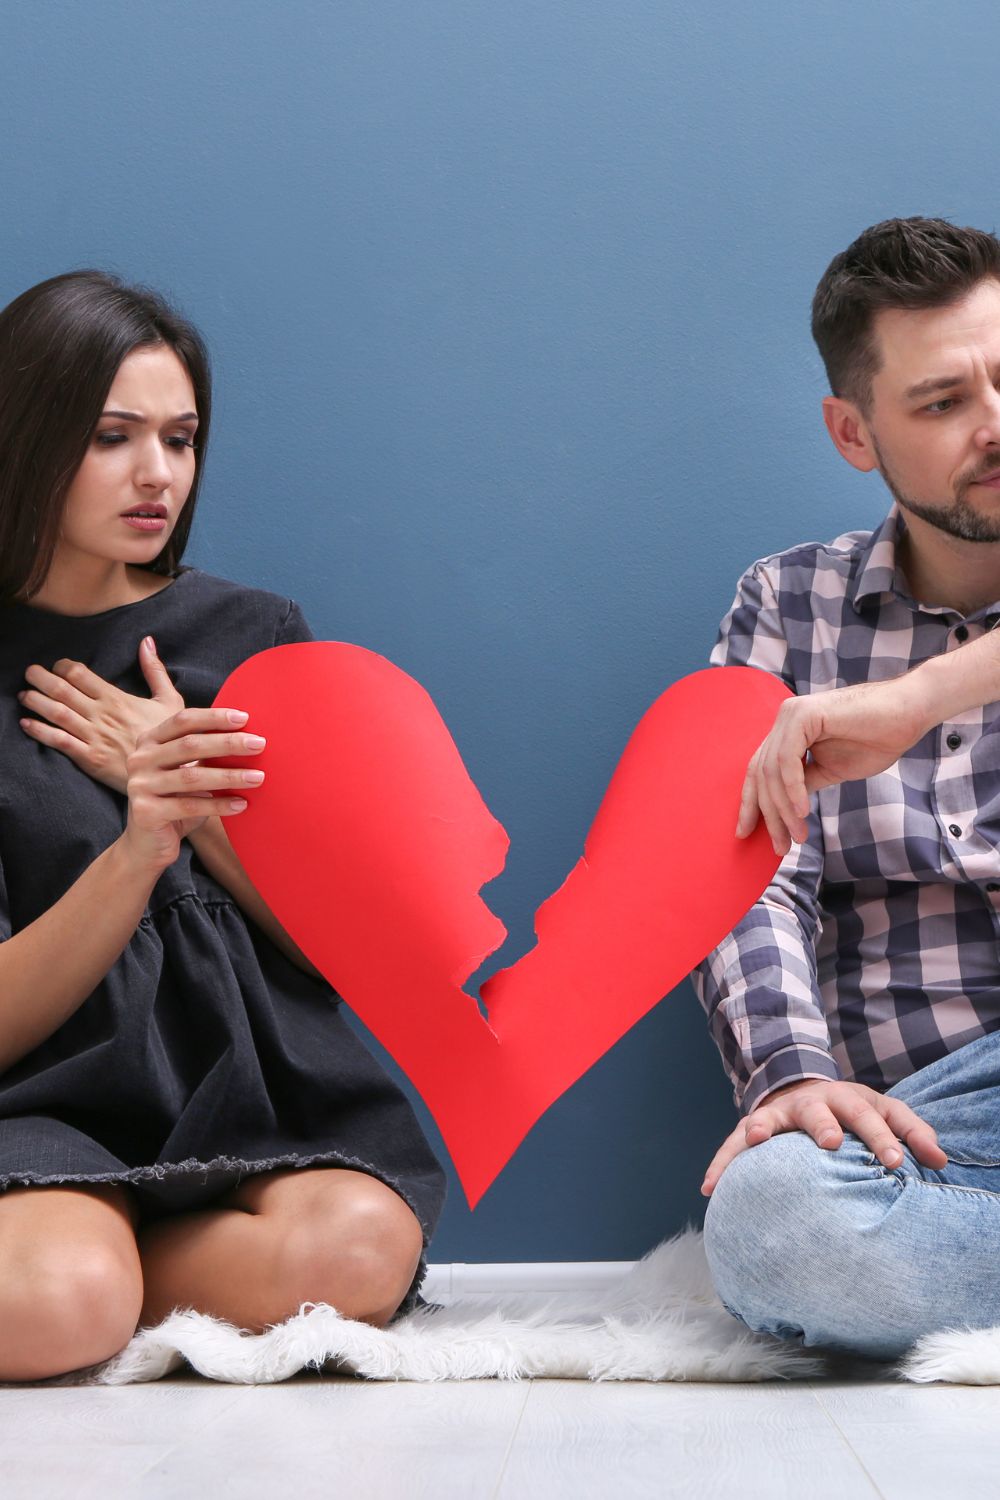 Signs your partner is falling for someone else